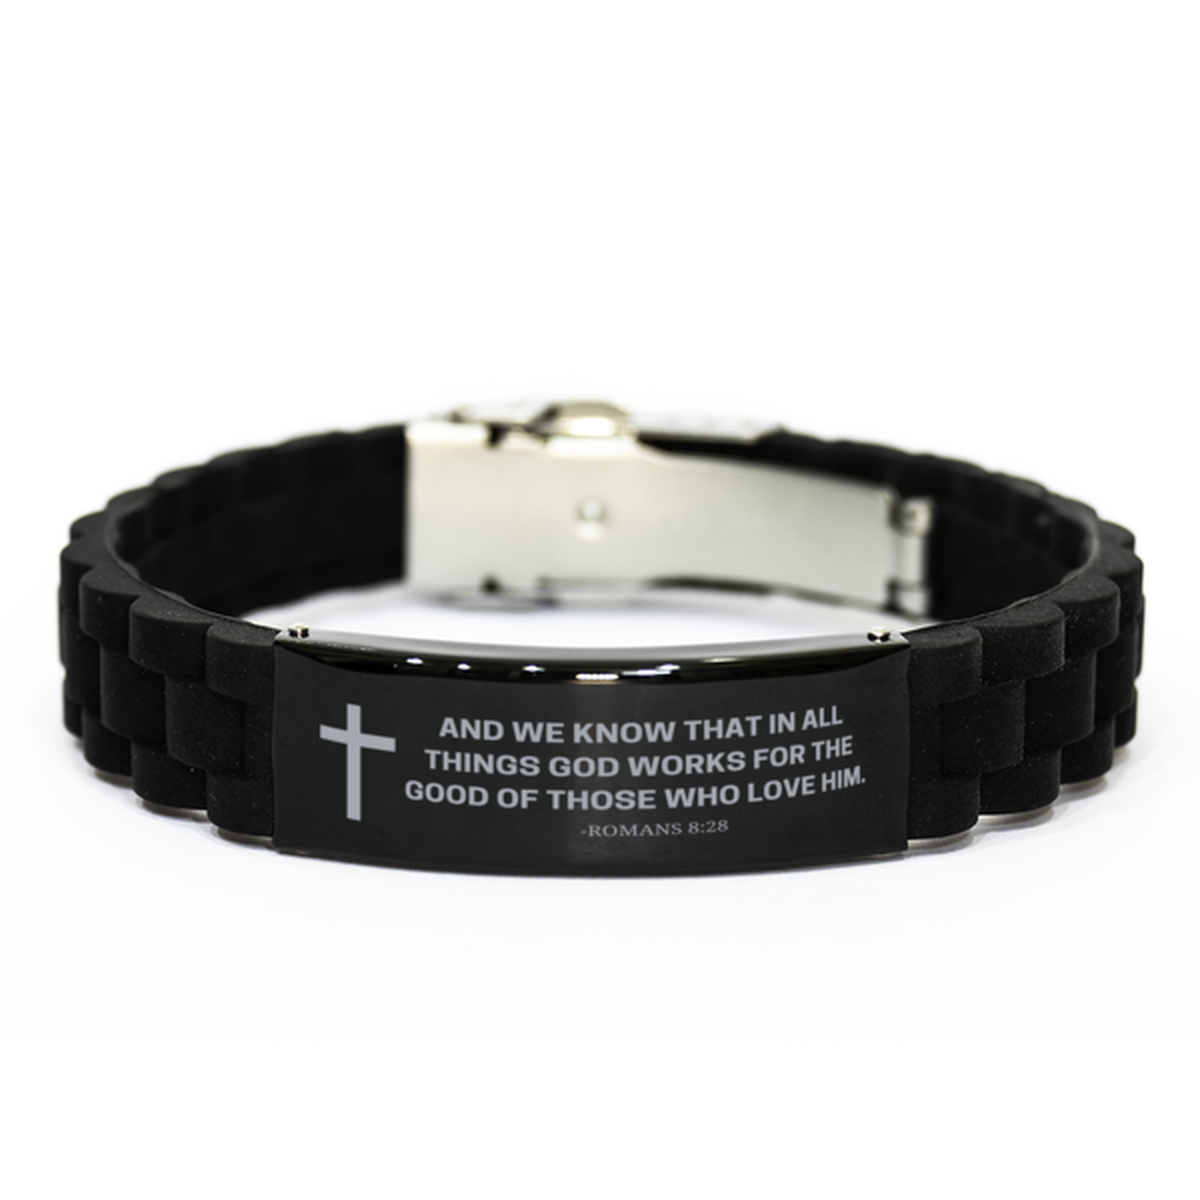 Baptism Gifts For Teenage Boys Girls, Christian Bible Verse Black Glidelock Clasp Bracelet, And we know that in all things, Catholic Confirmation Gifts for Son, Godson, Grandson, Nephew